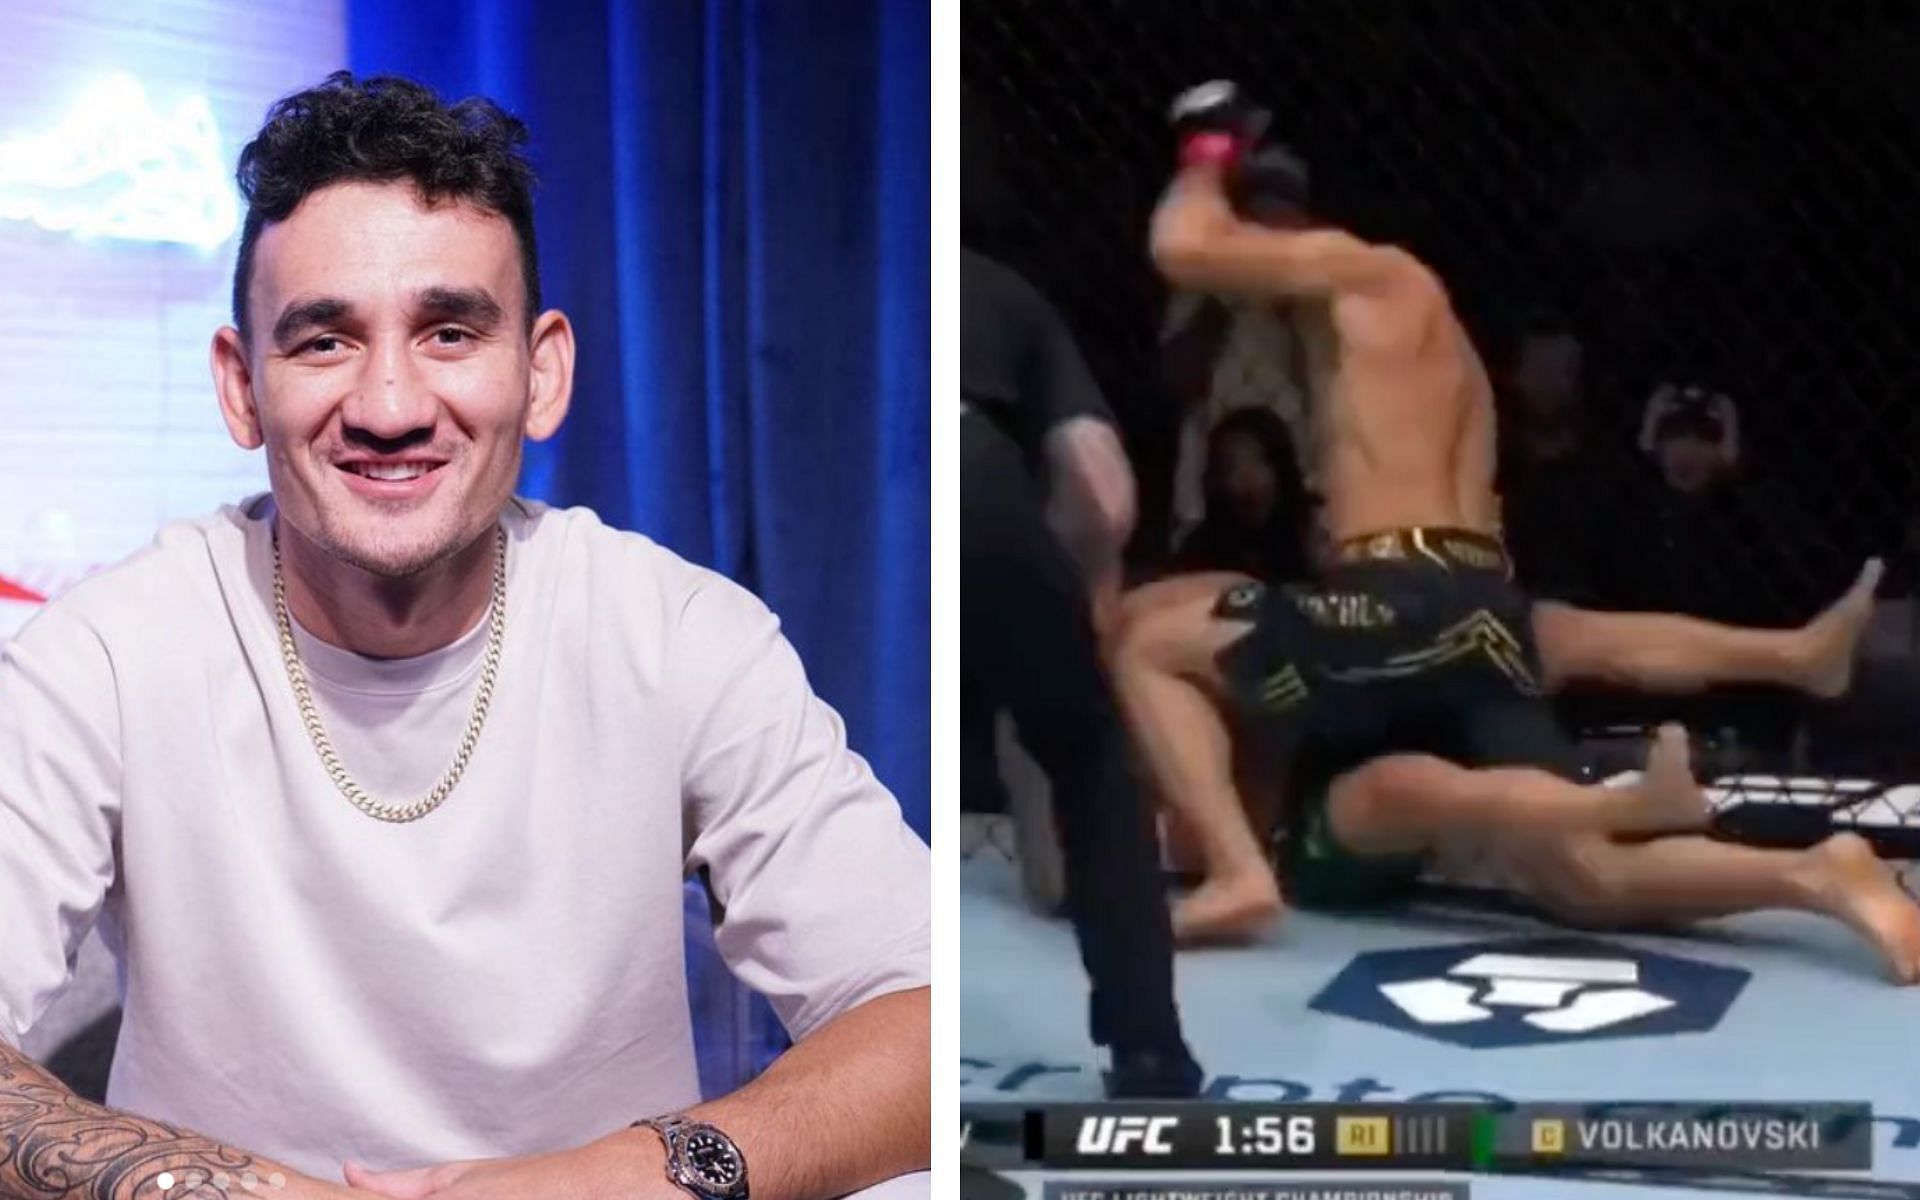 Max Holloway (left) reacts to Islam Makhachev